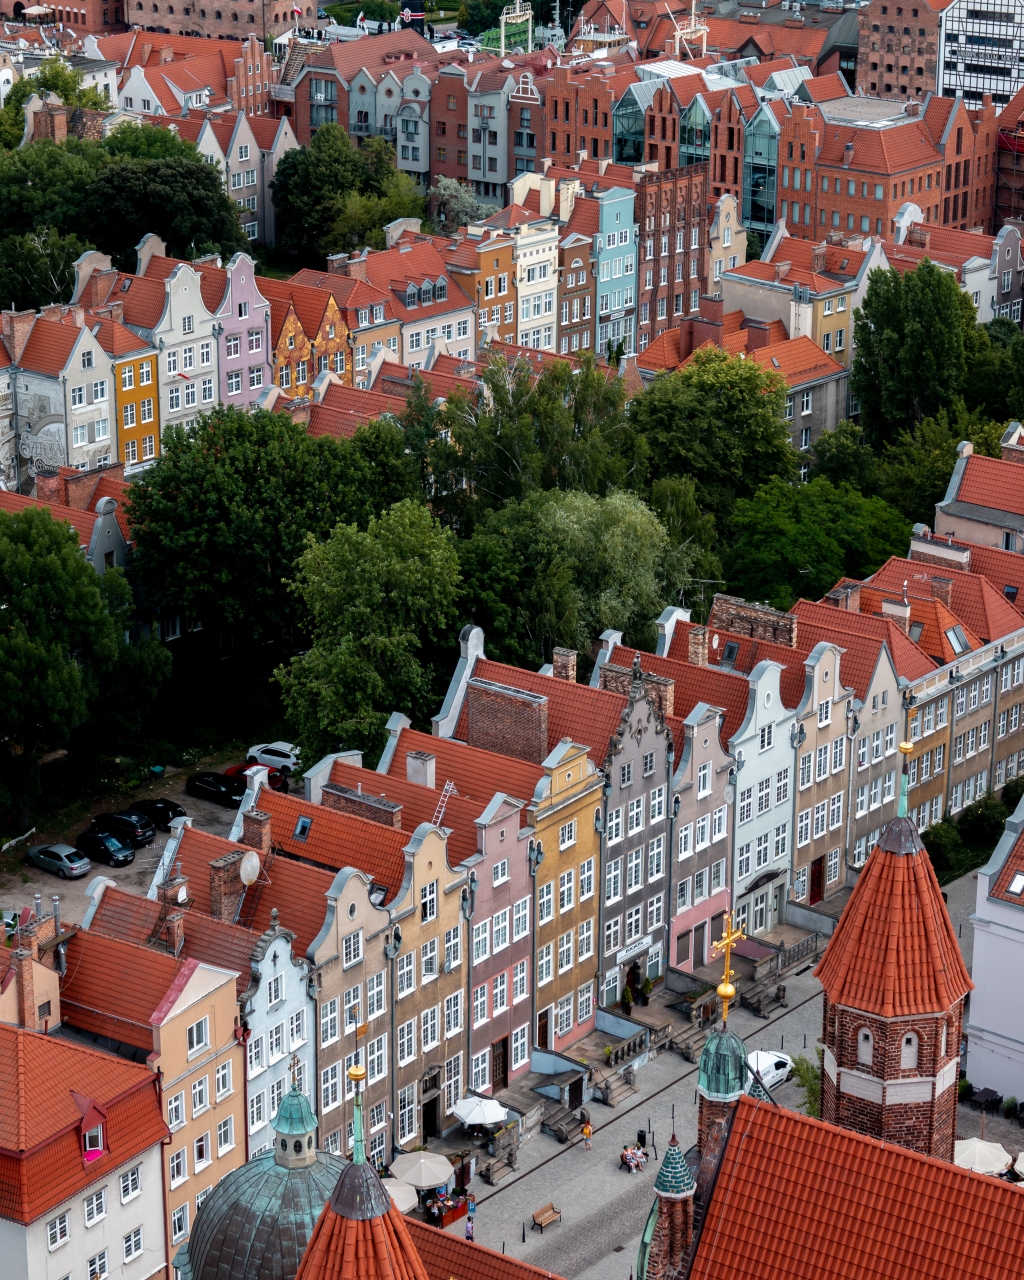 How to Spend the day in Gdańsk, Poland